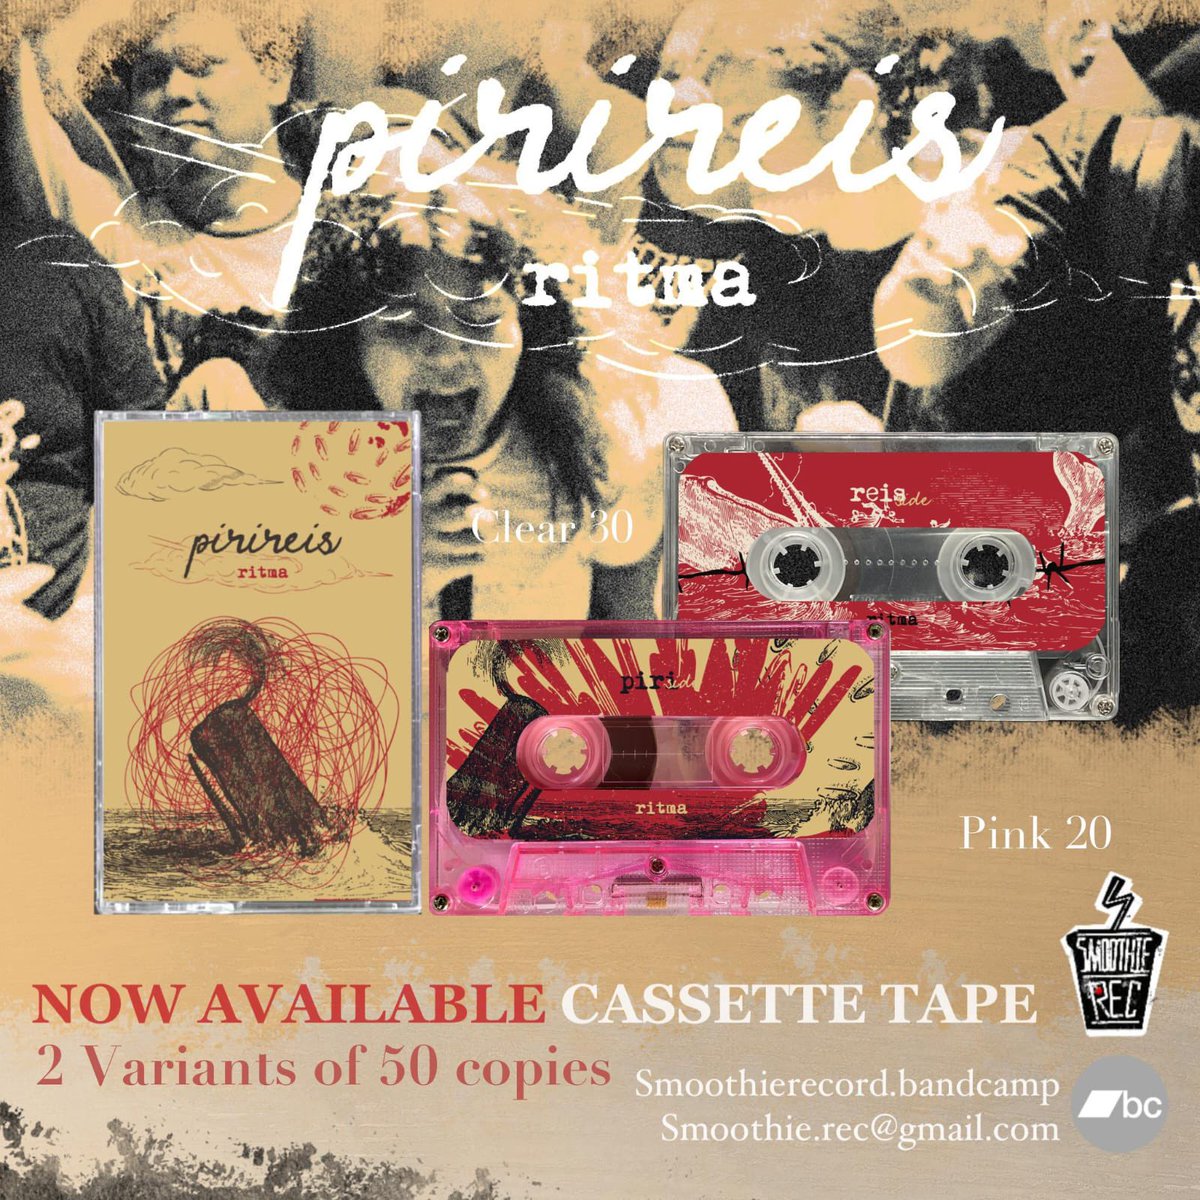 Coming soon! Piri Reis - ritma Tape (Thailand version) Limited to 50 pcs. Clear & pink tapes. available only at out Bangkok show. Be there!